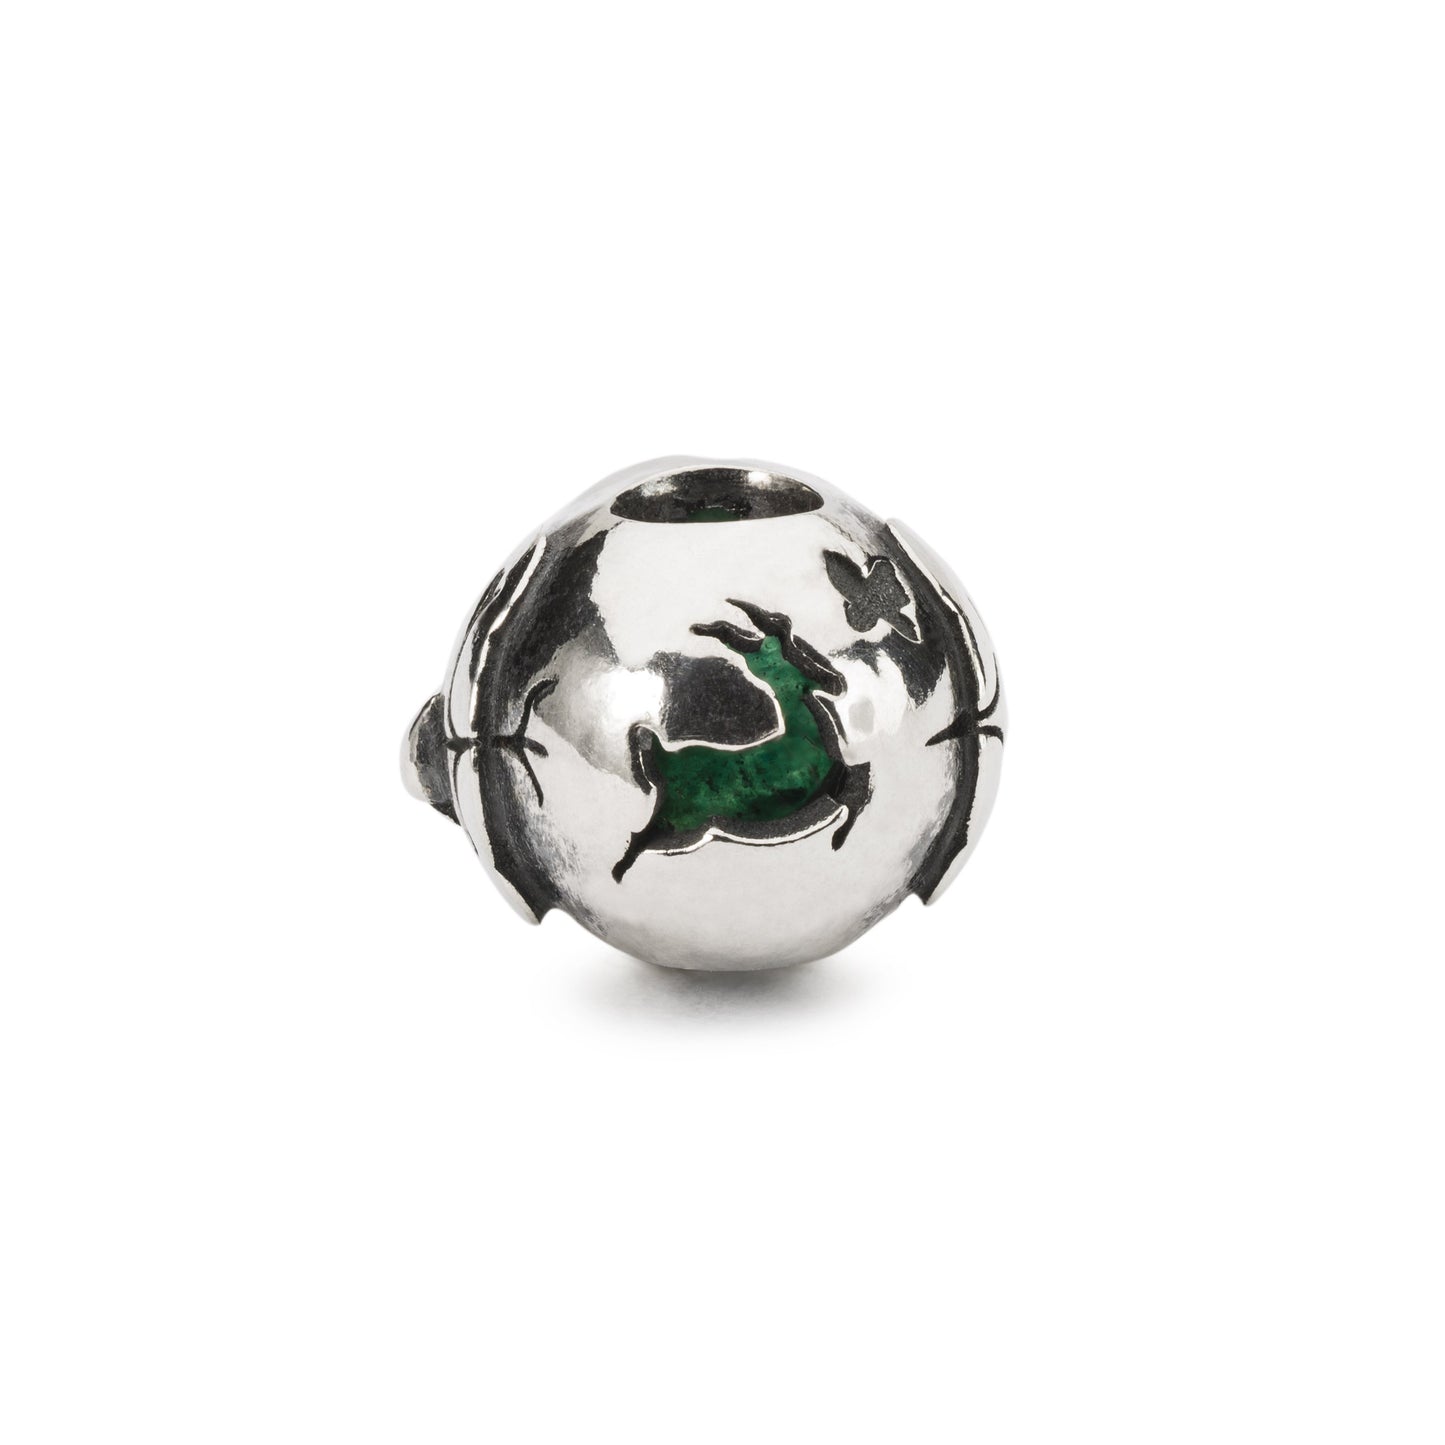 AARDE-TROLLBEADS-DAY-LIMITED-EDITION